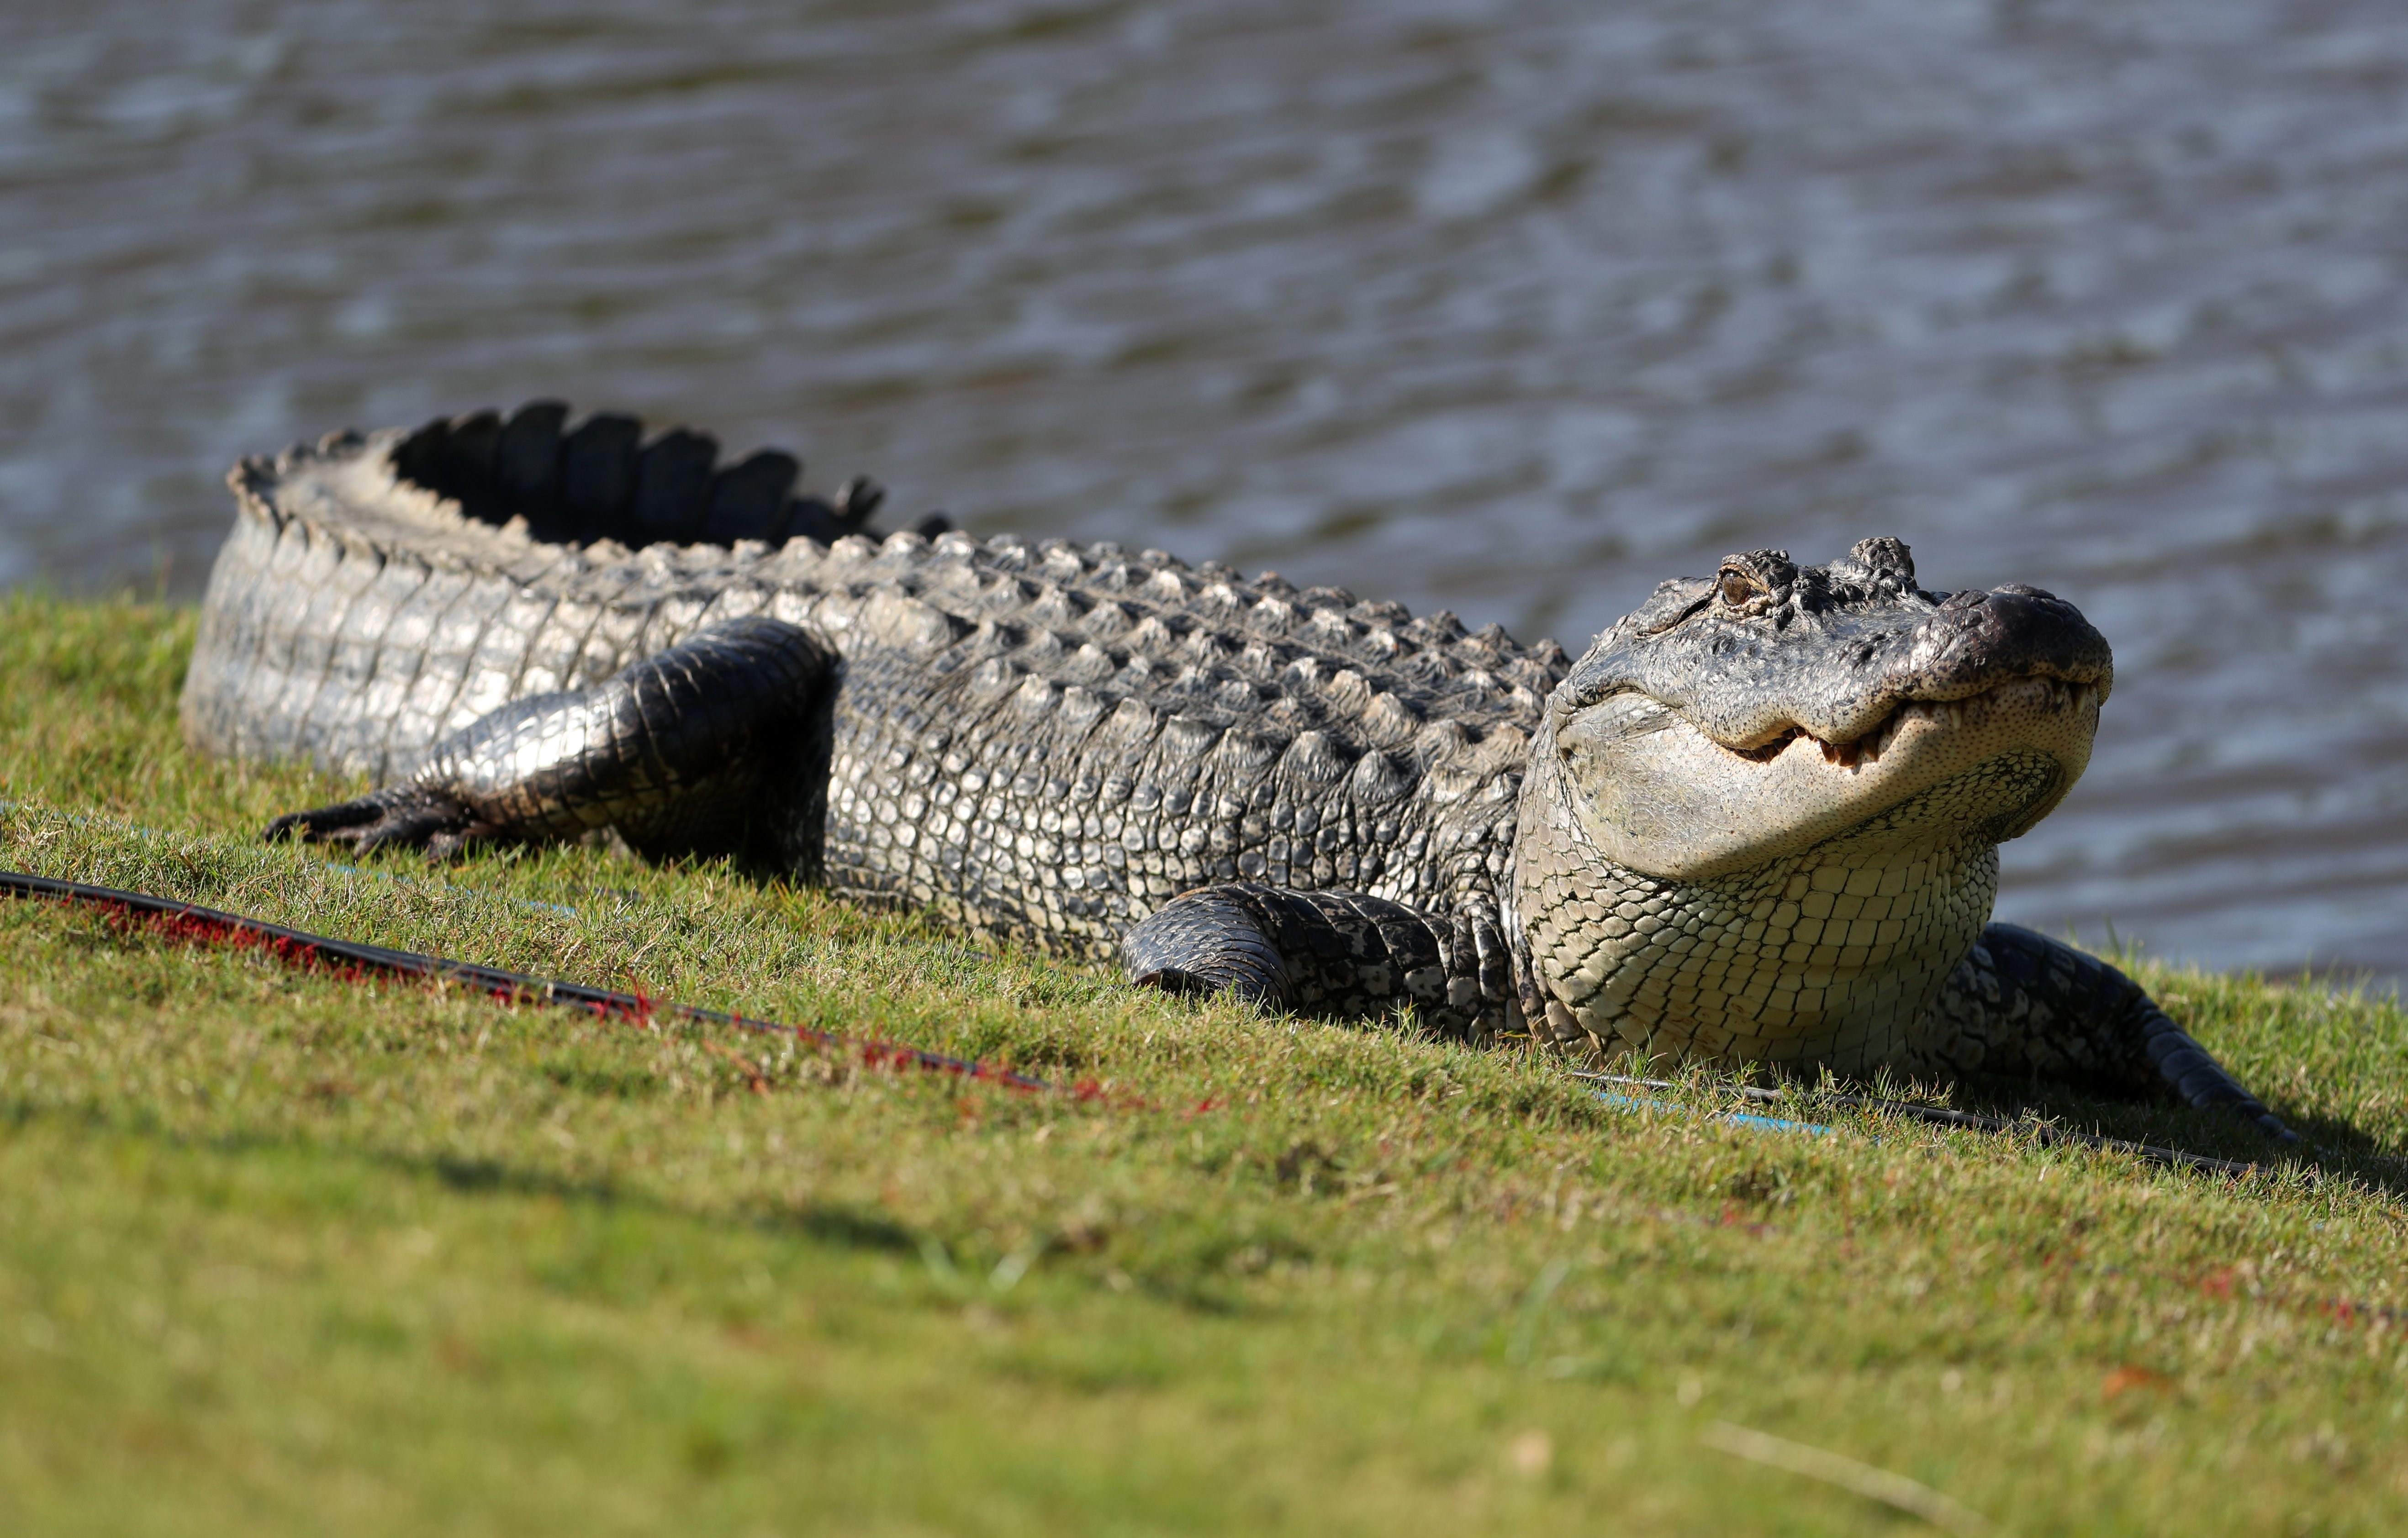 An alligator is seen near the seventh green during the first round of the Zurich Classic at TPC Louisiana on April 25, 2019 in Avondale, Louisiana. (Photo by Chris Graythen/Getty Images)